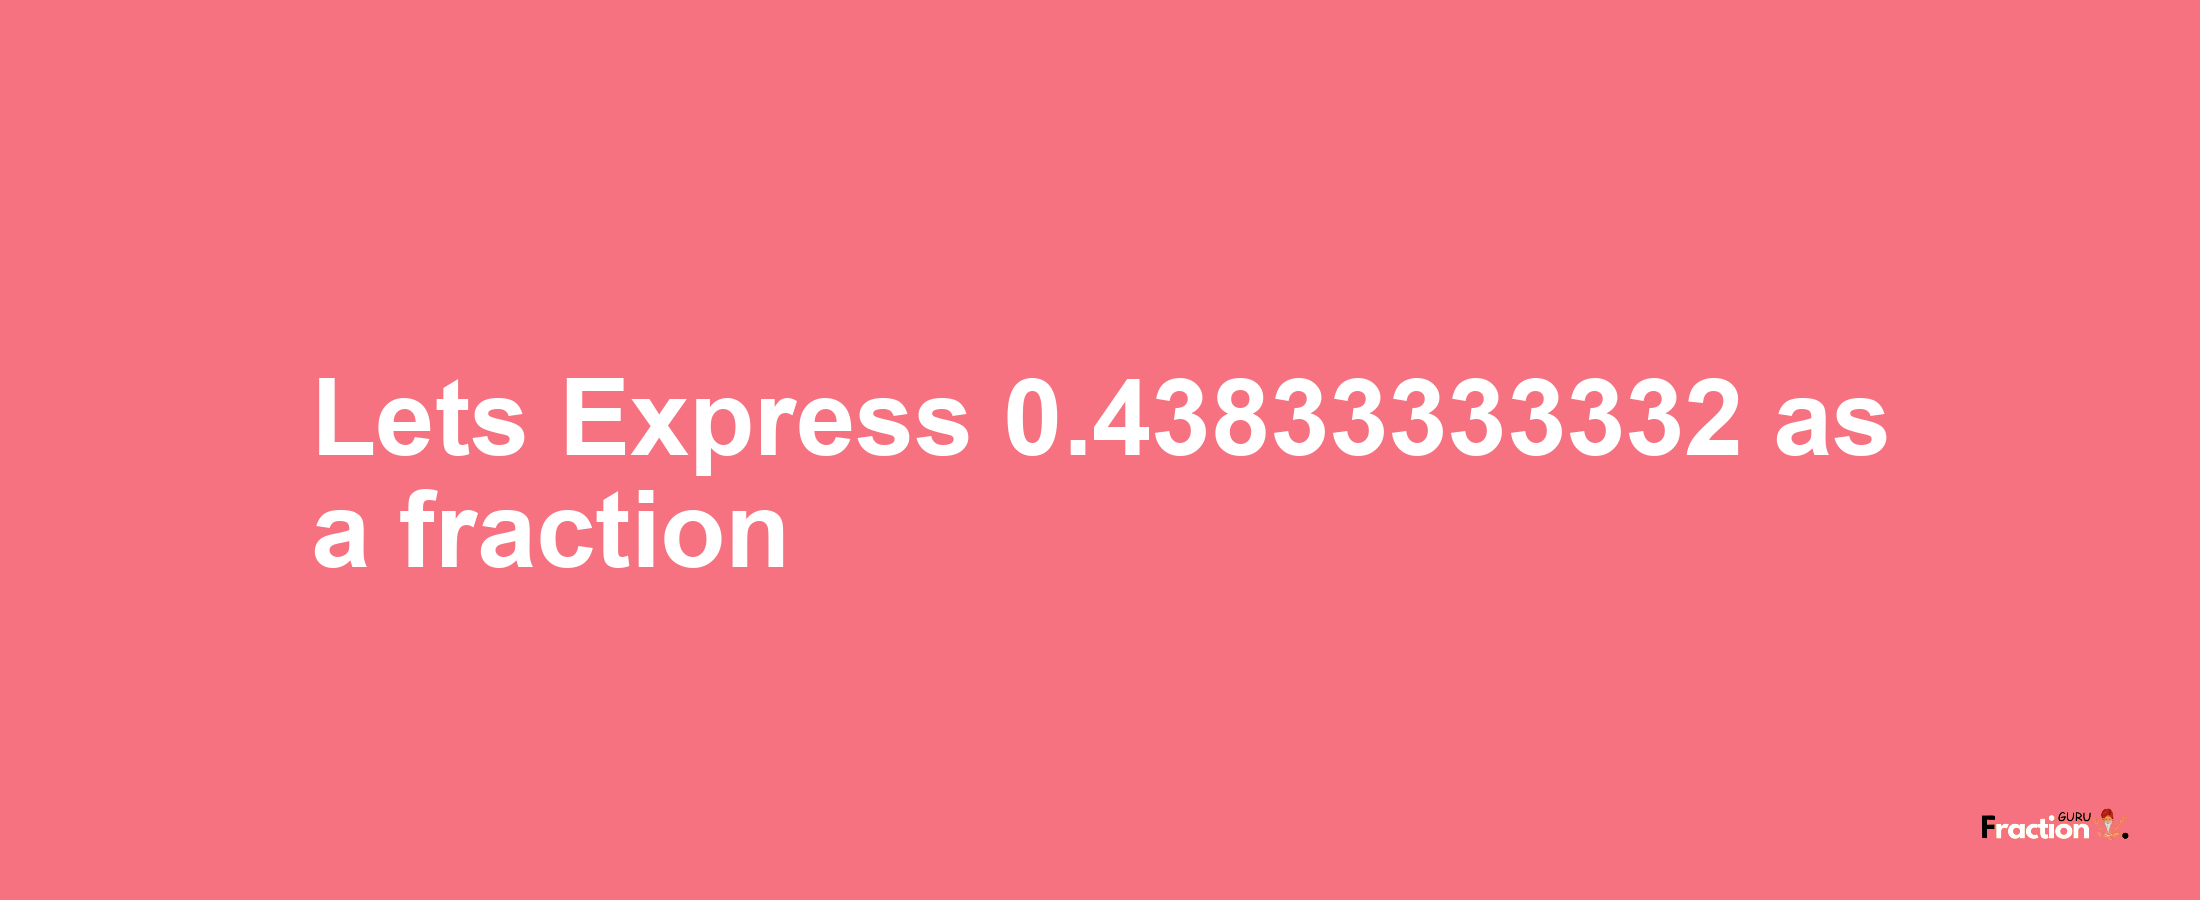 Lets Express 0.43833333332 as afraction